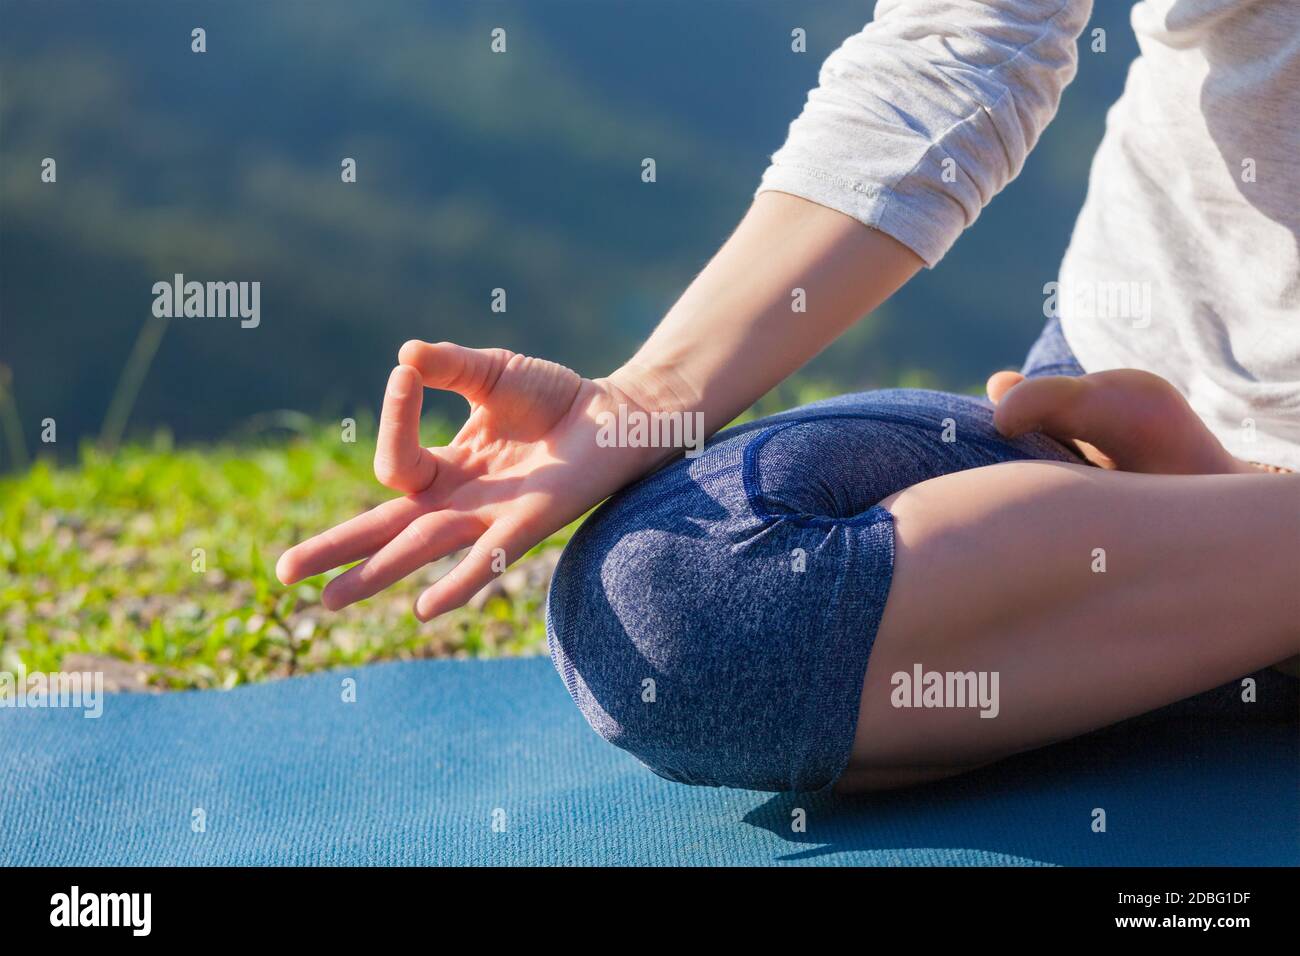 Meditation relaxation concept background - close up of woman in Padmasana yoga lotus pose with chin mudra outdoors with copyspace Stock Photo